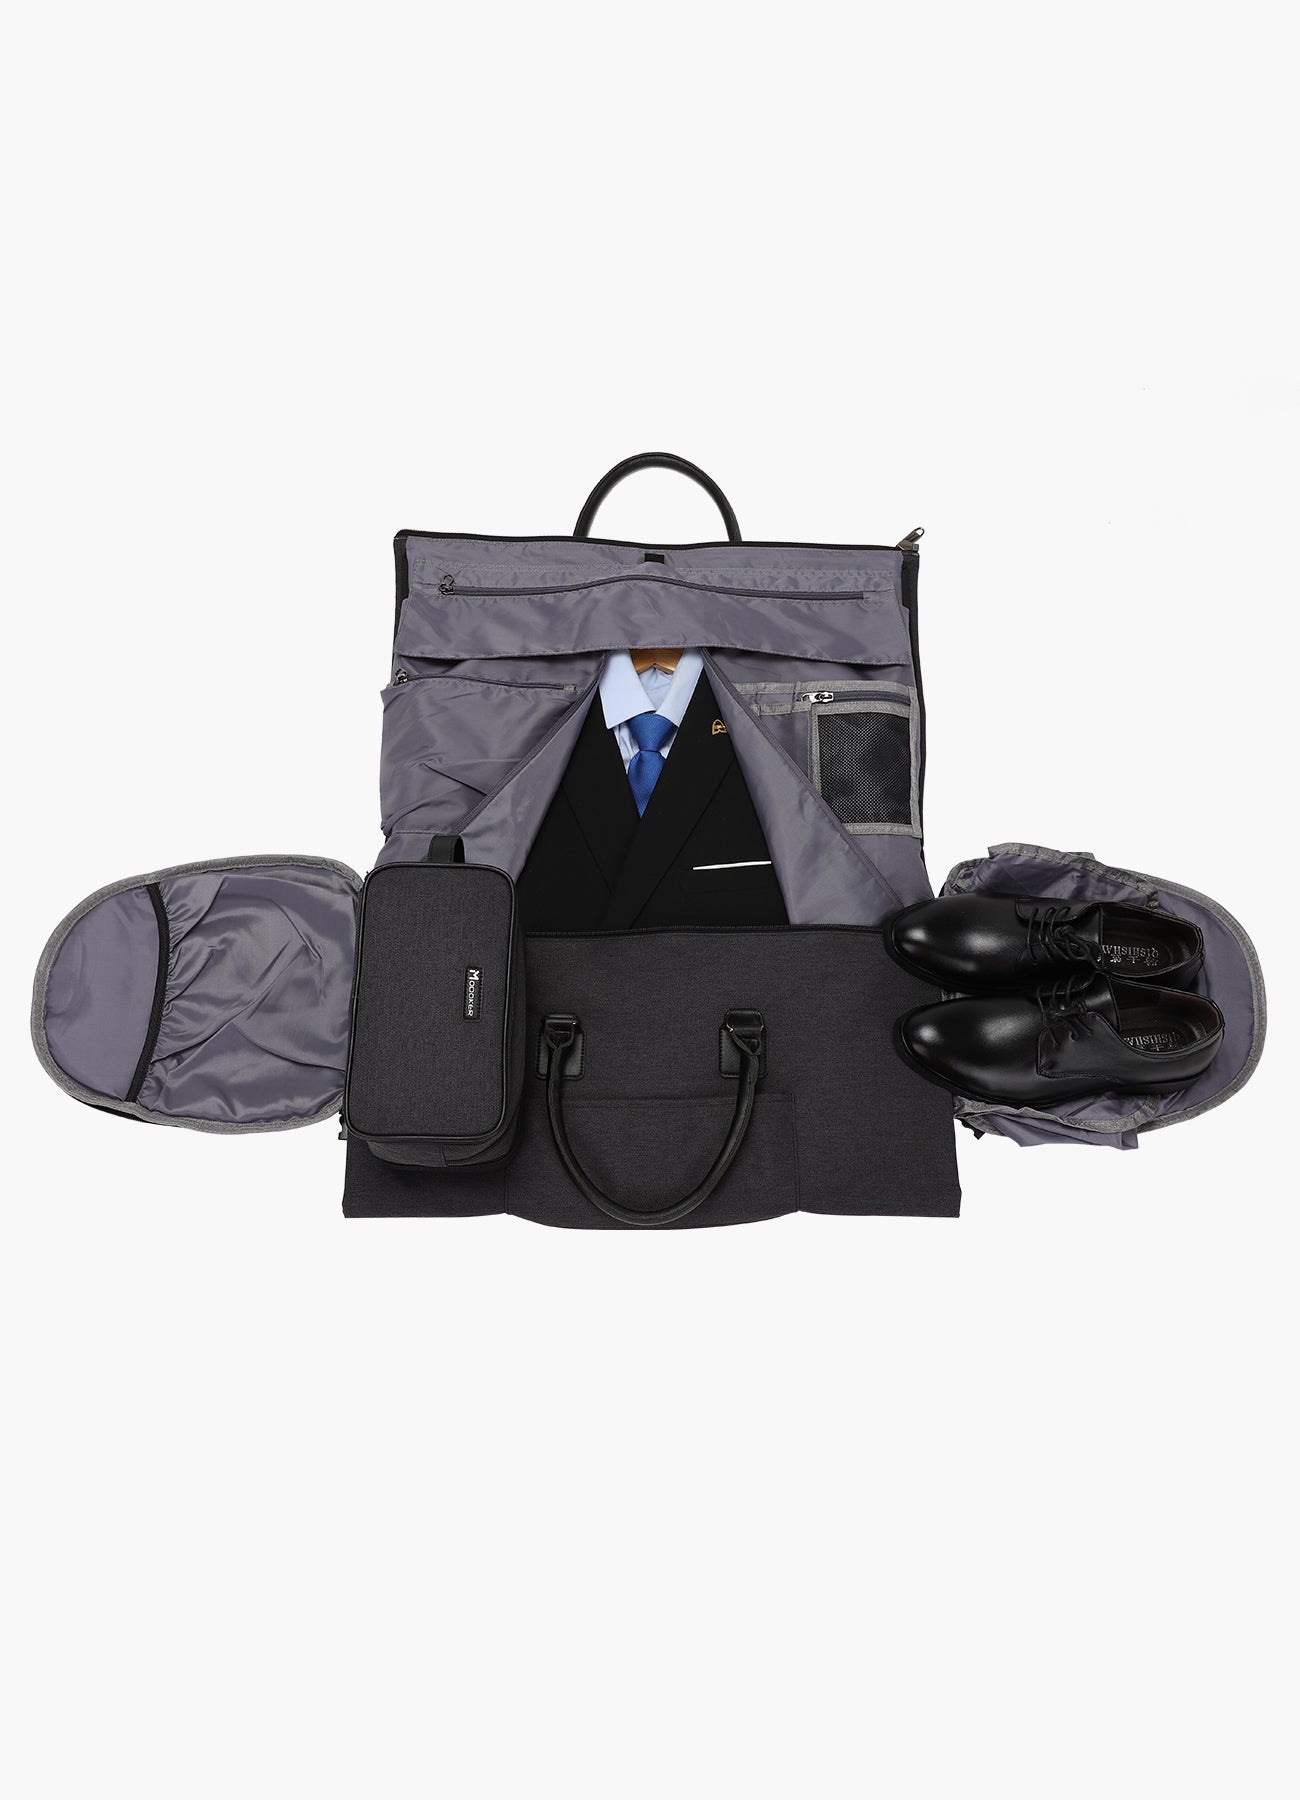 Garment Bag for Travel With Toiletry Bag Convertible